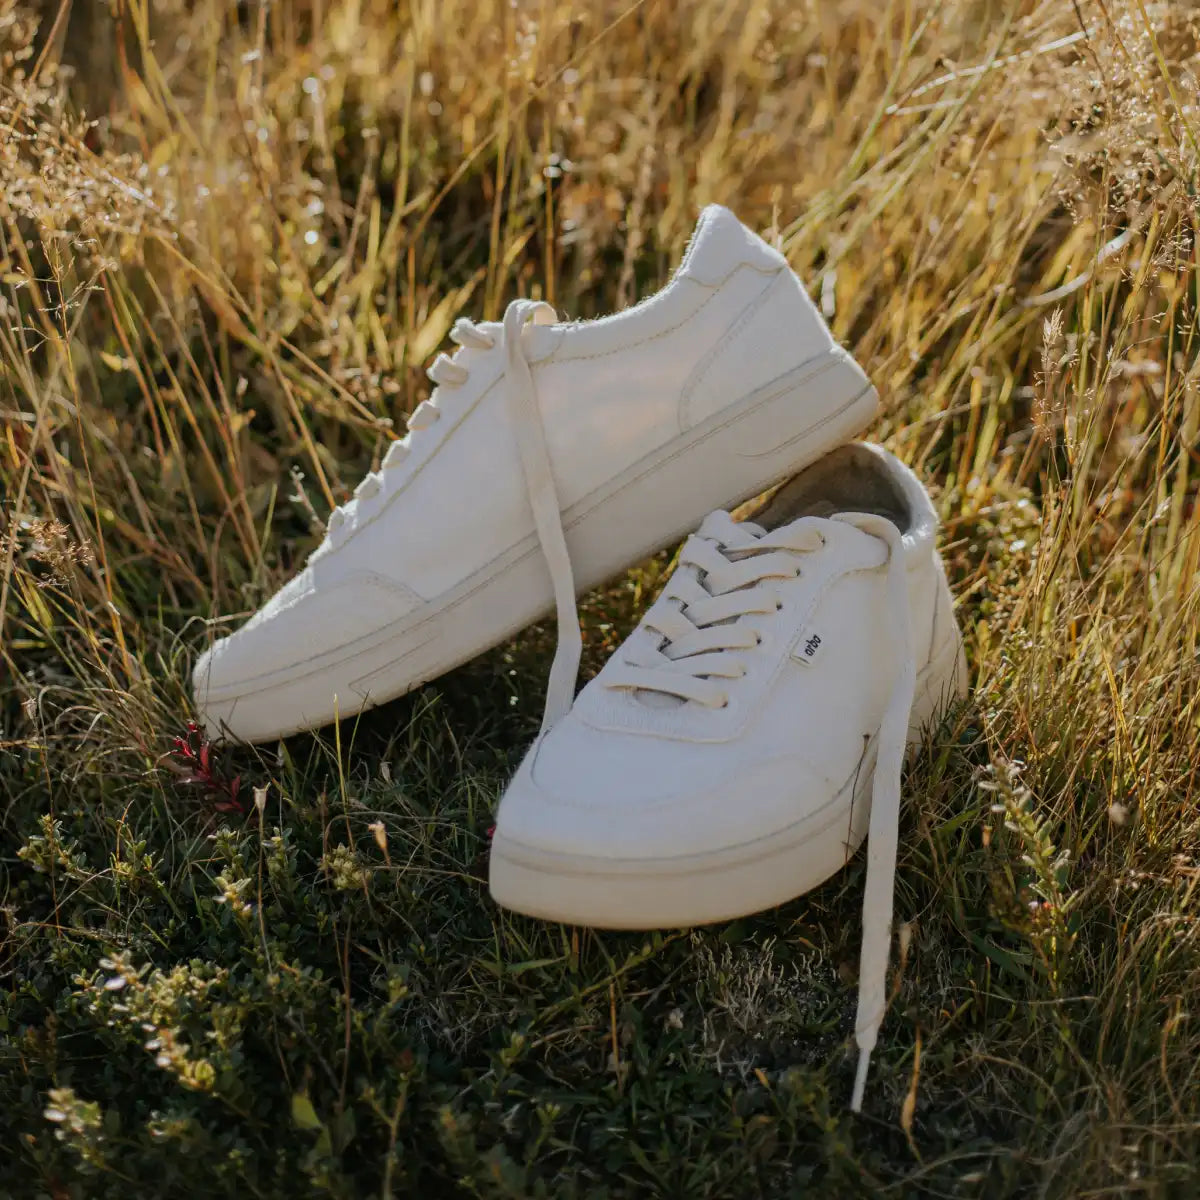 Orba Ghost Sneakers in grass at sunset